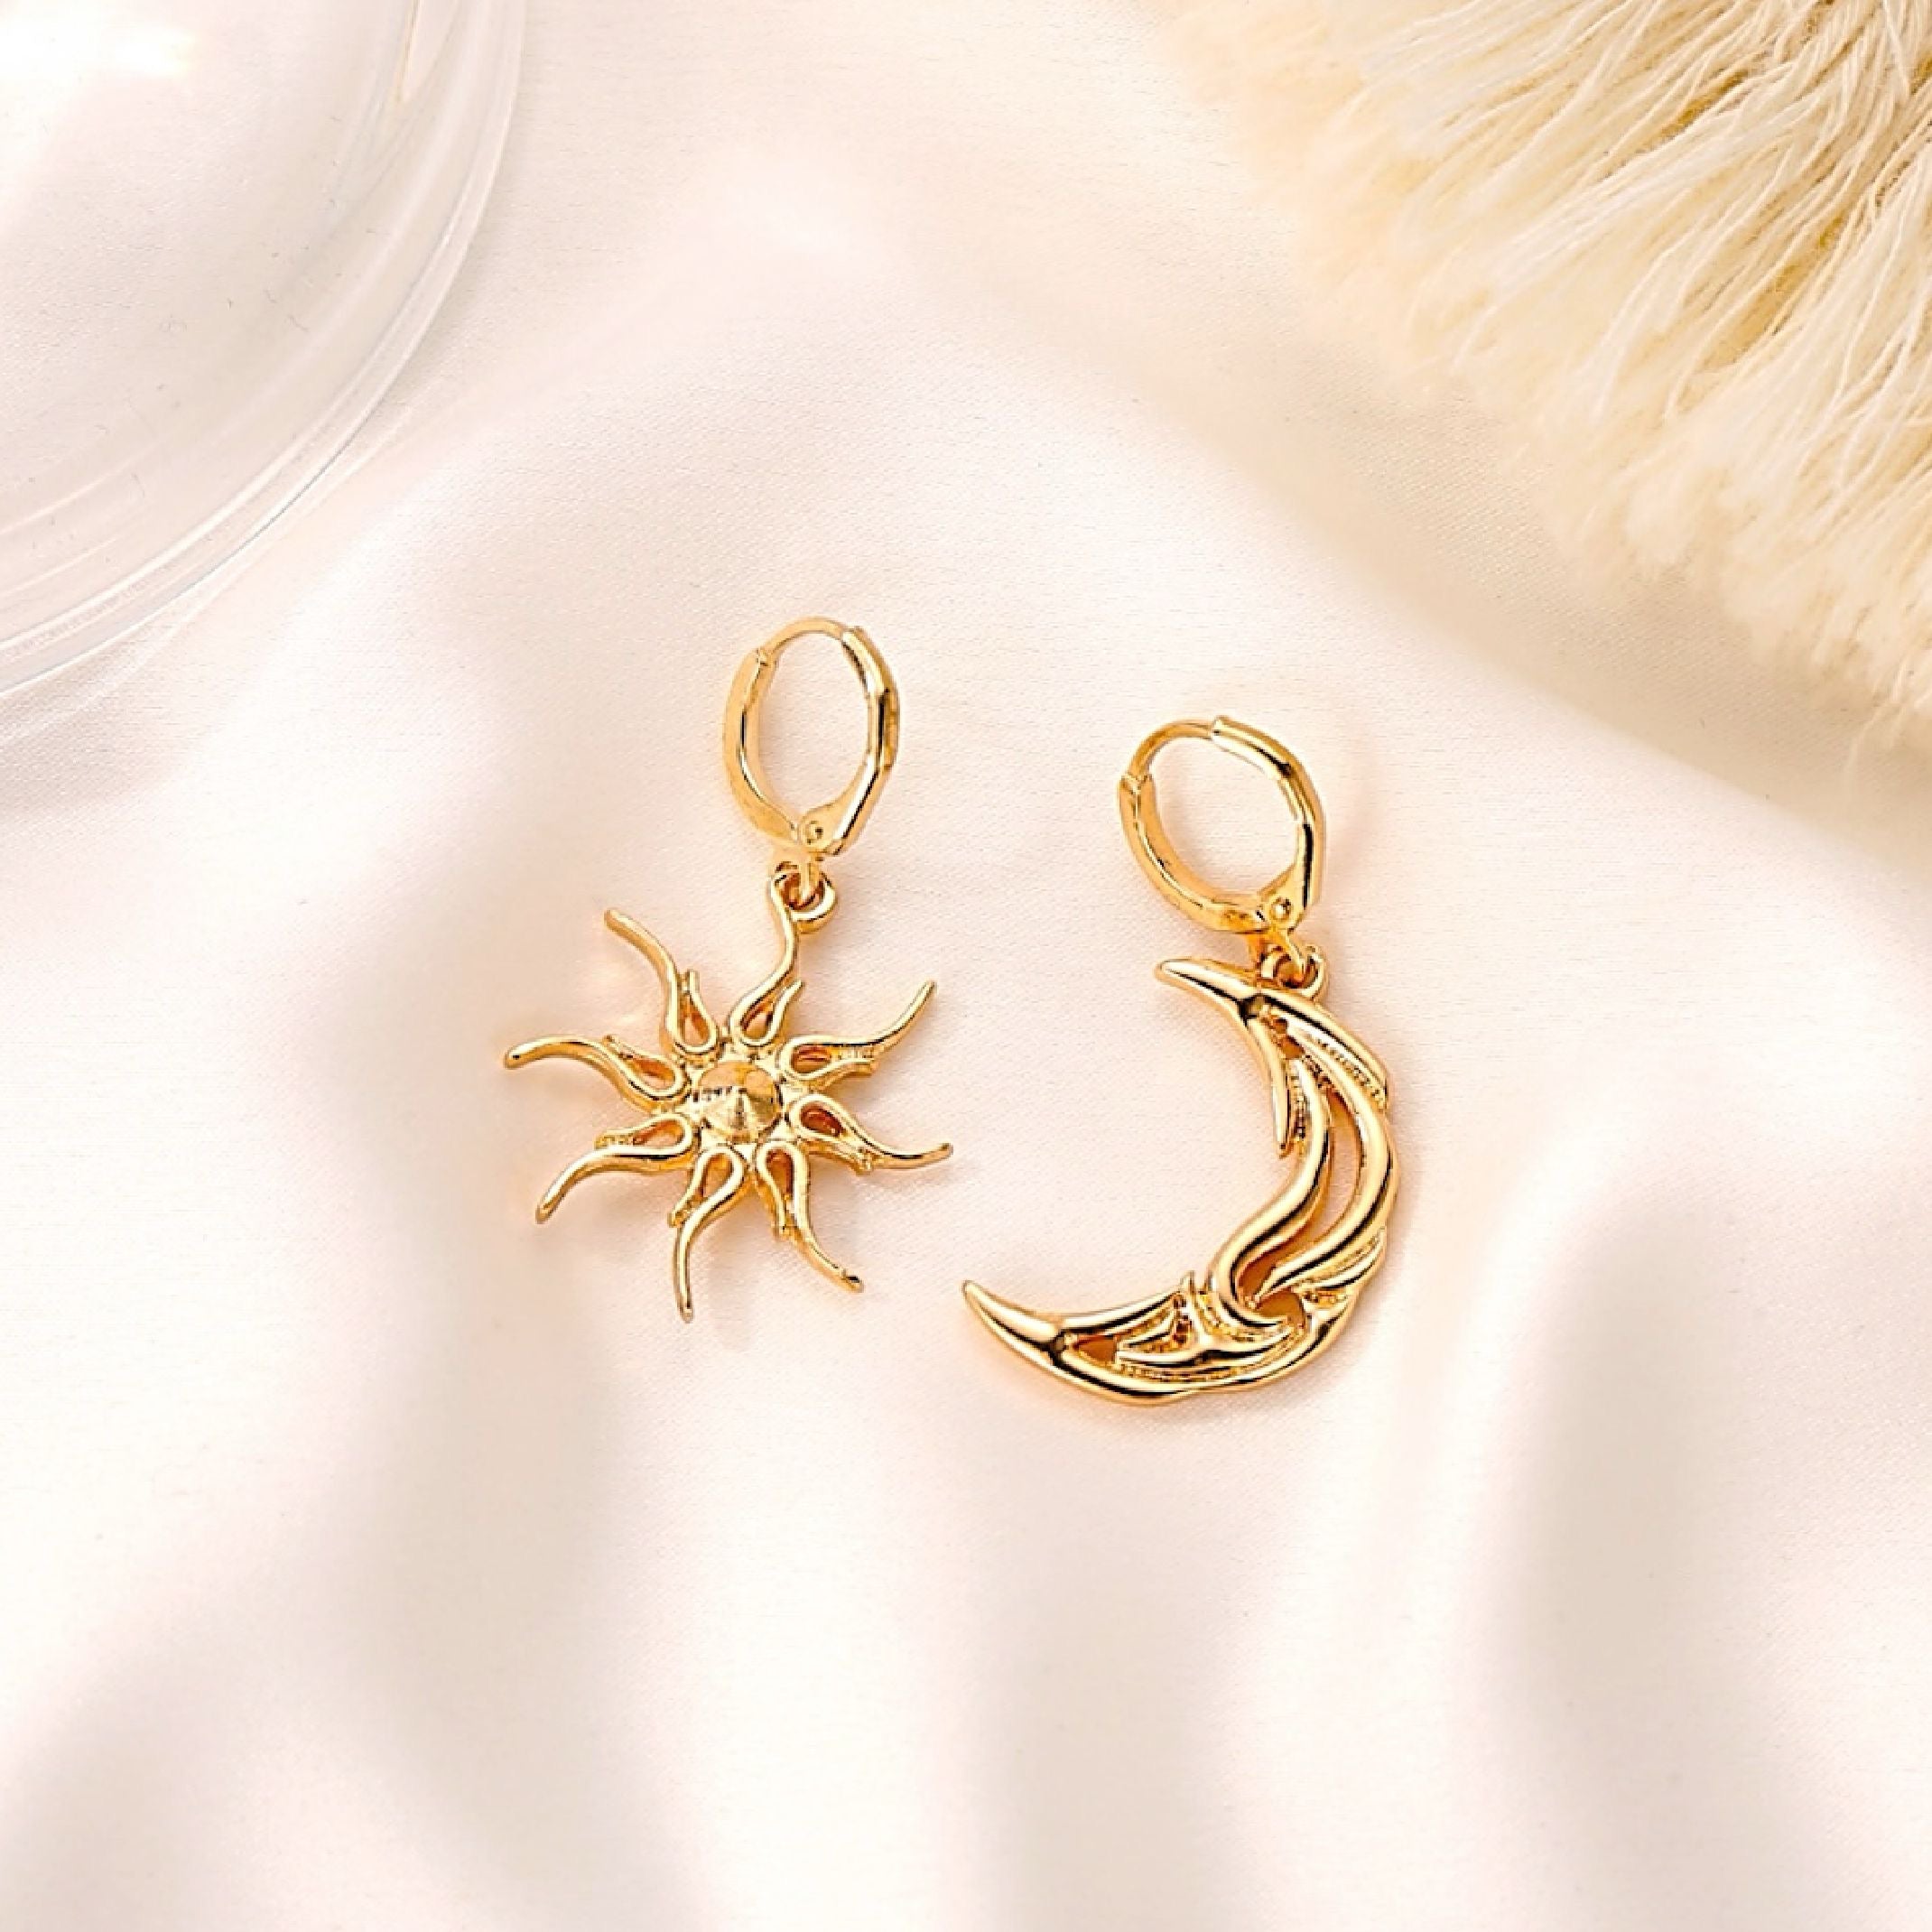 Gold moon and star earrings 